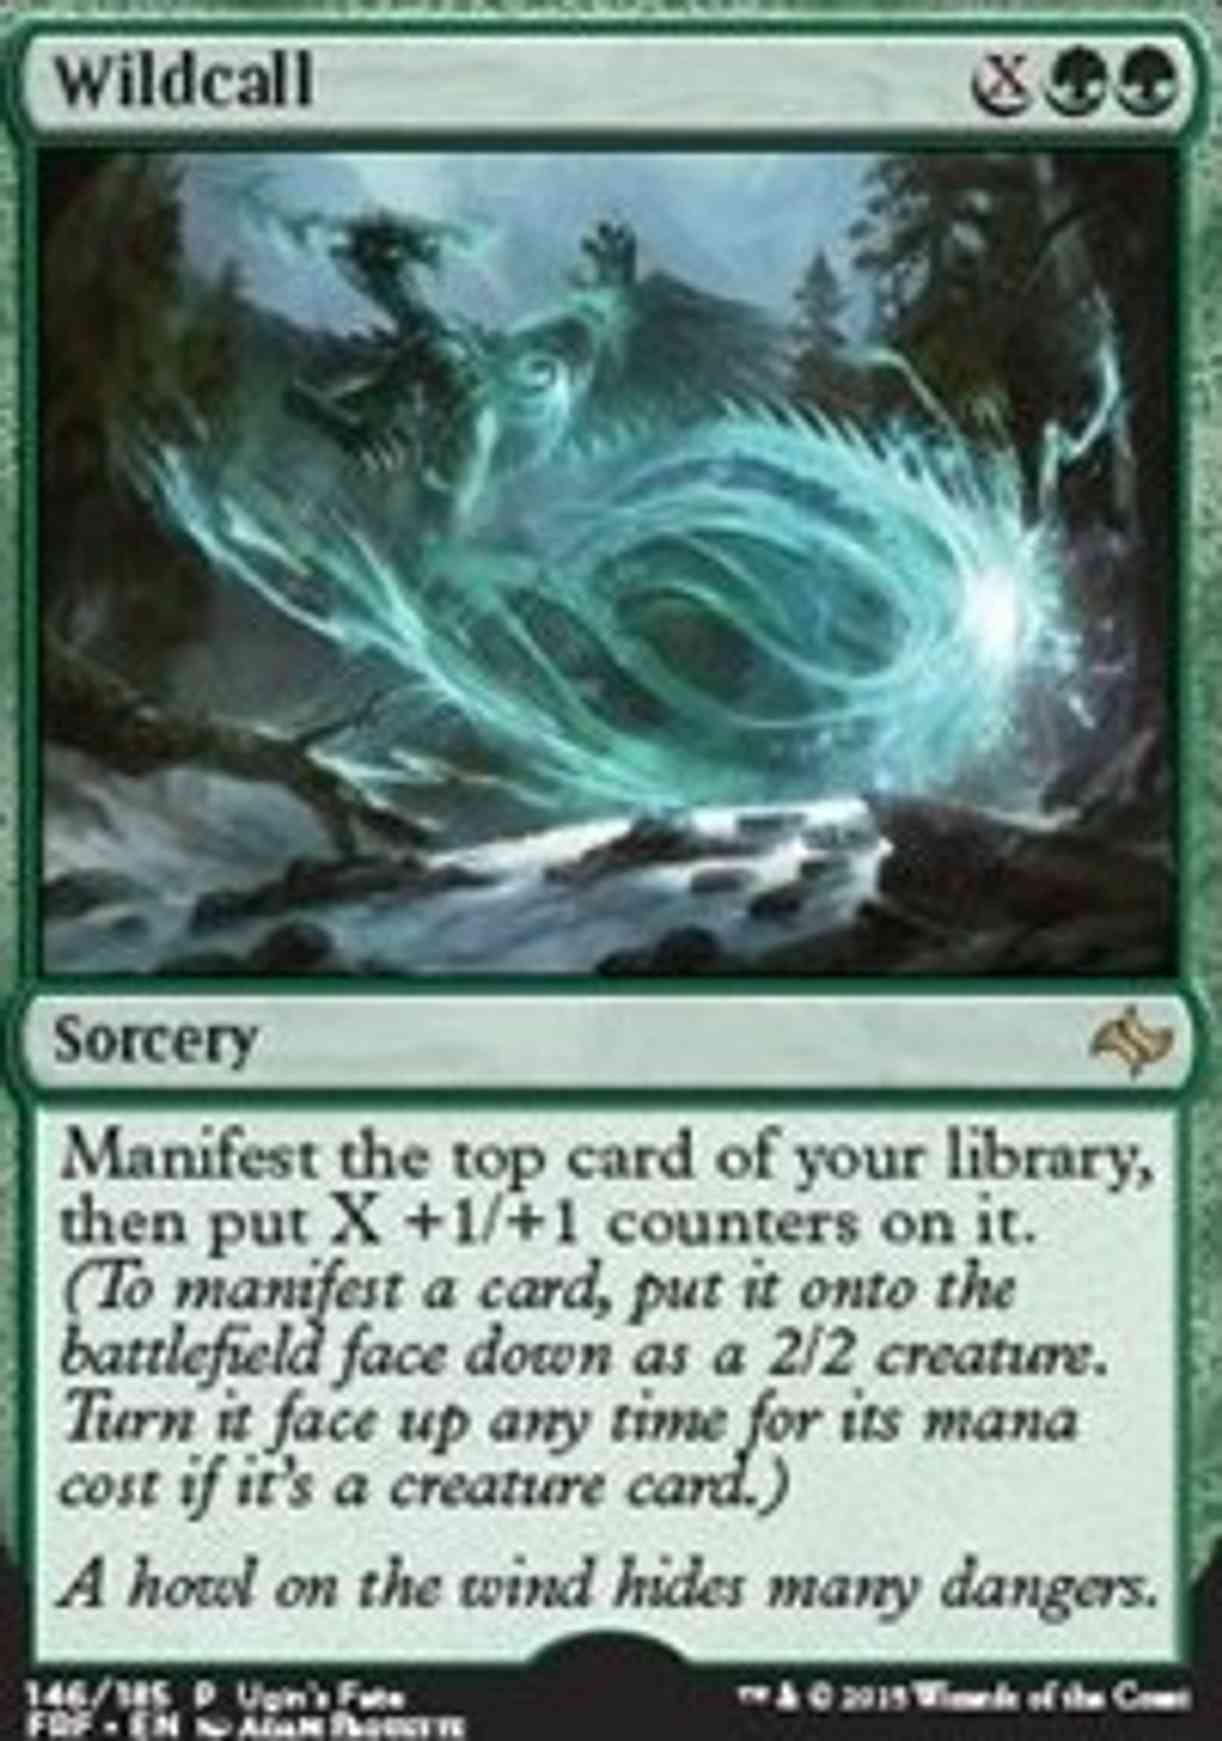 Wildcall magic card front